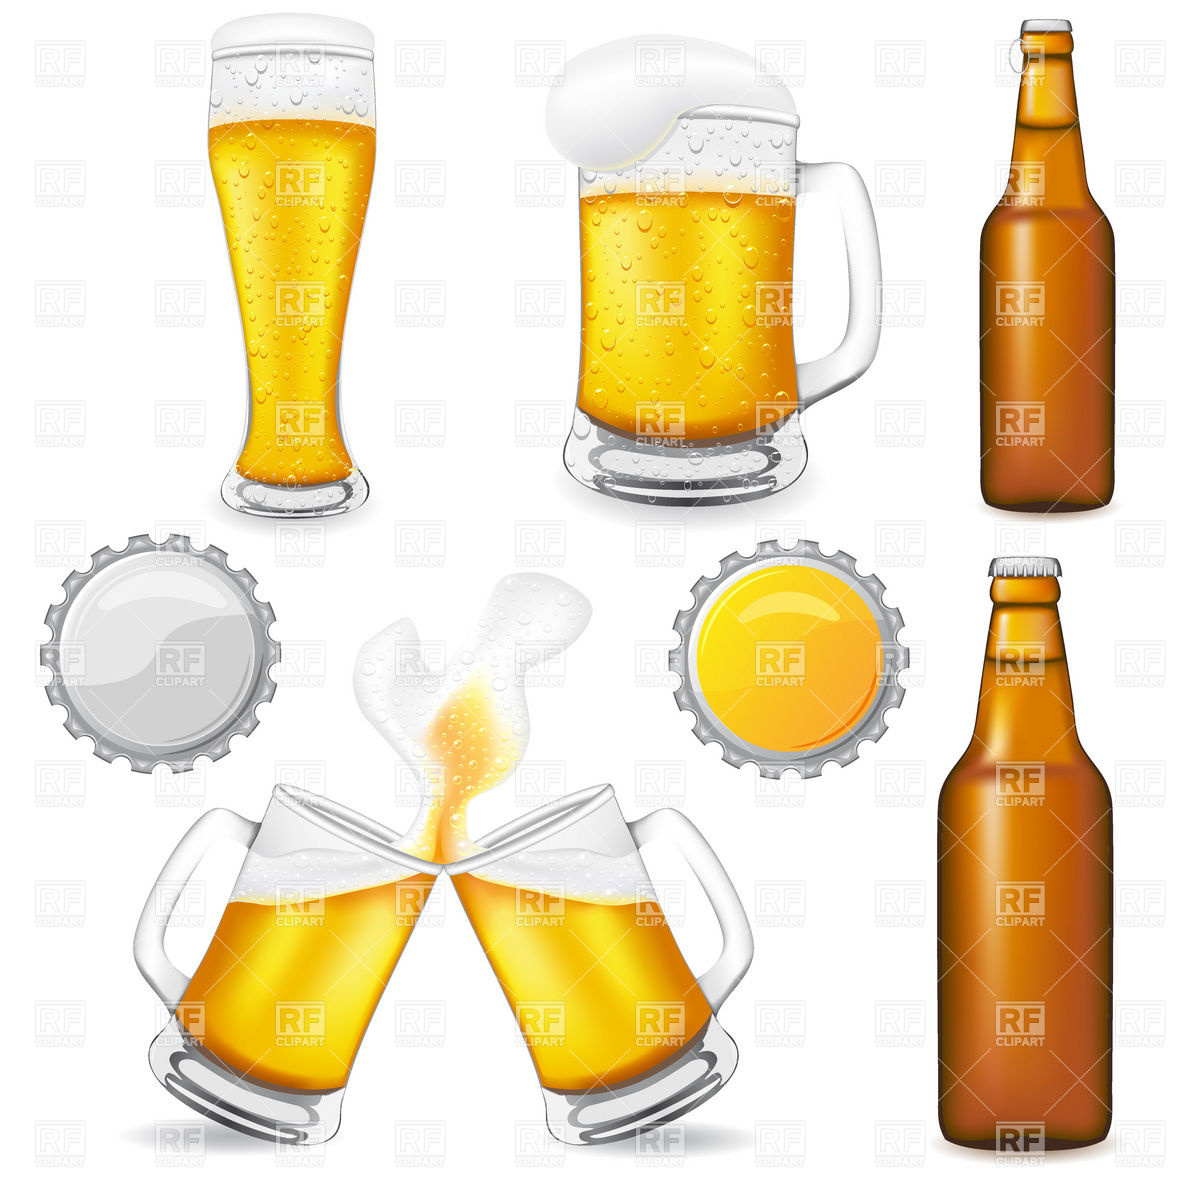 Brown beer bottle, glass and mugs Vector Image #19769.